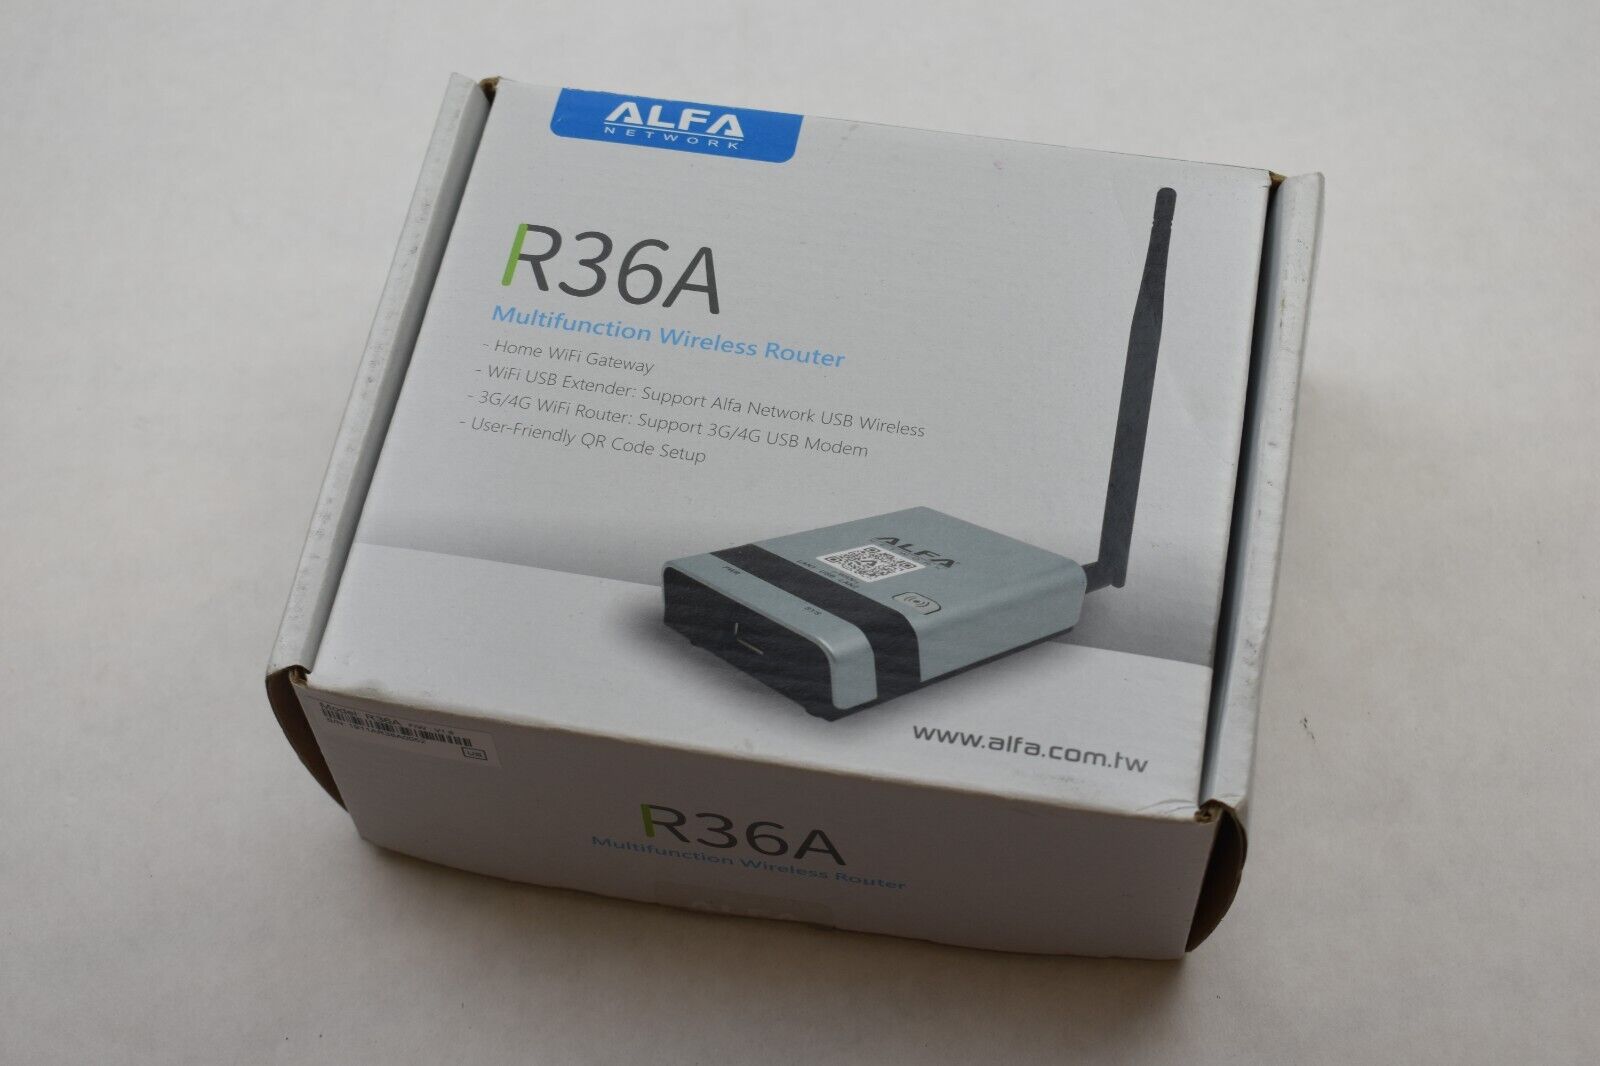 Alfa R36A Multifunction Wireless Router